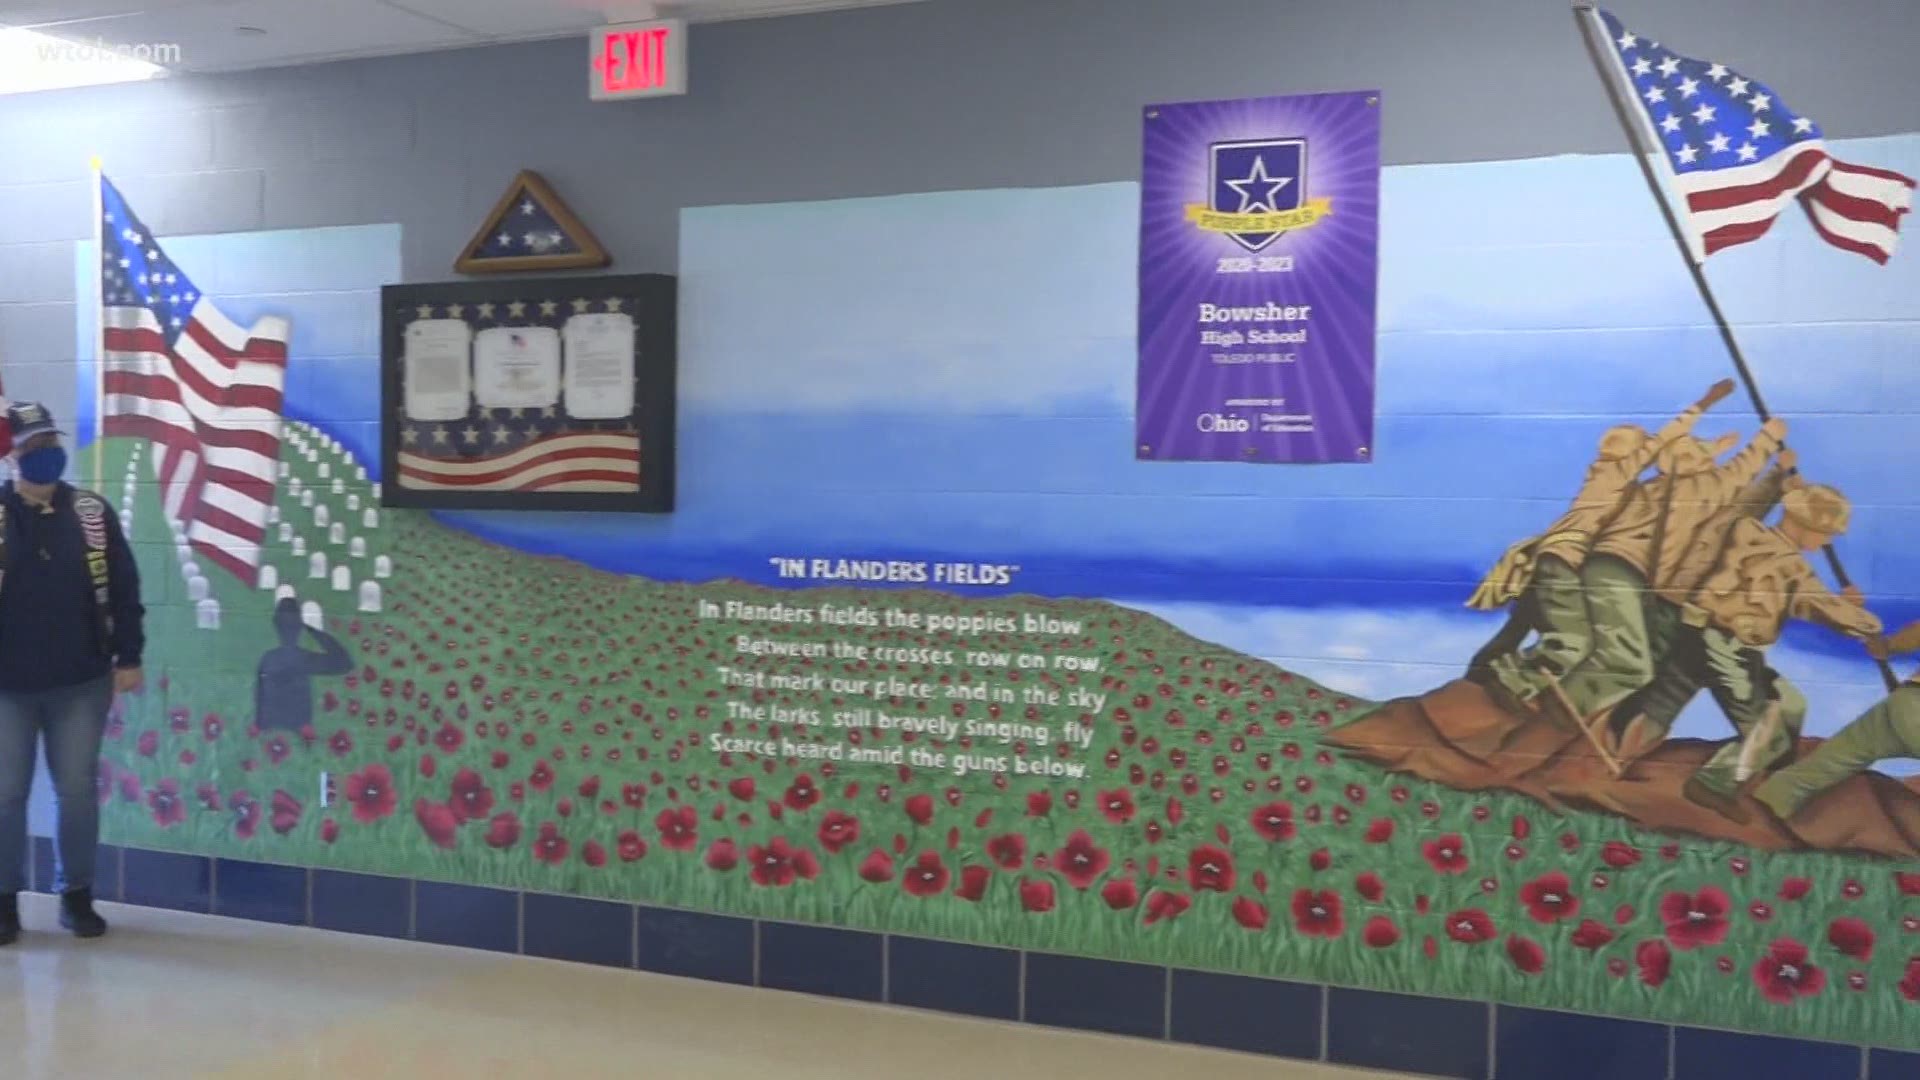 Bowsher High School is now home to a new mural dedicated to the brave men and women who serve our country.